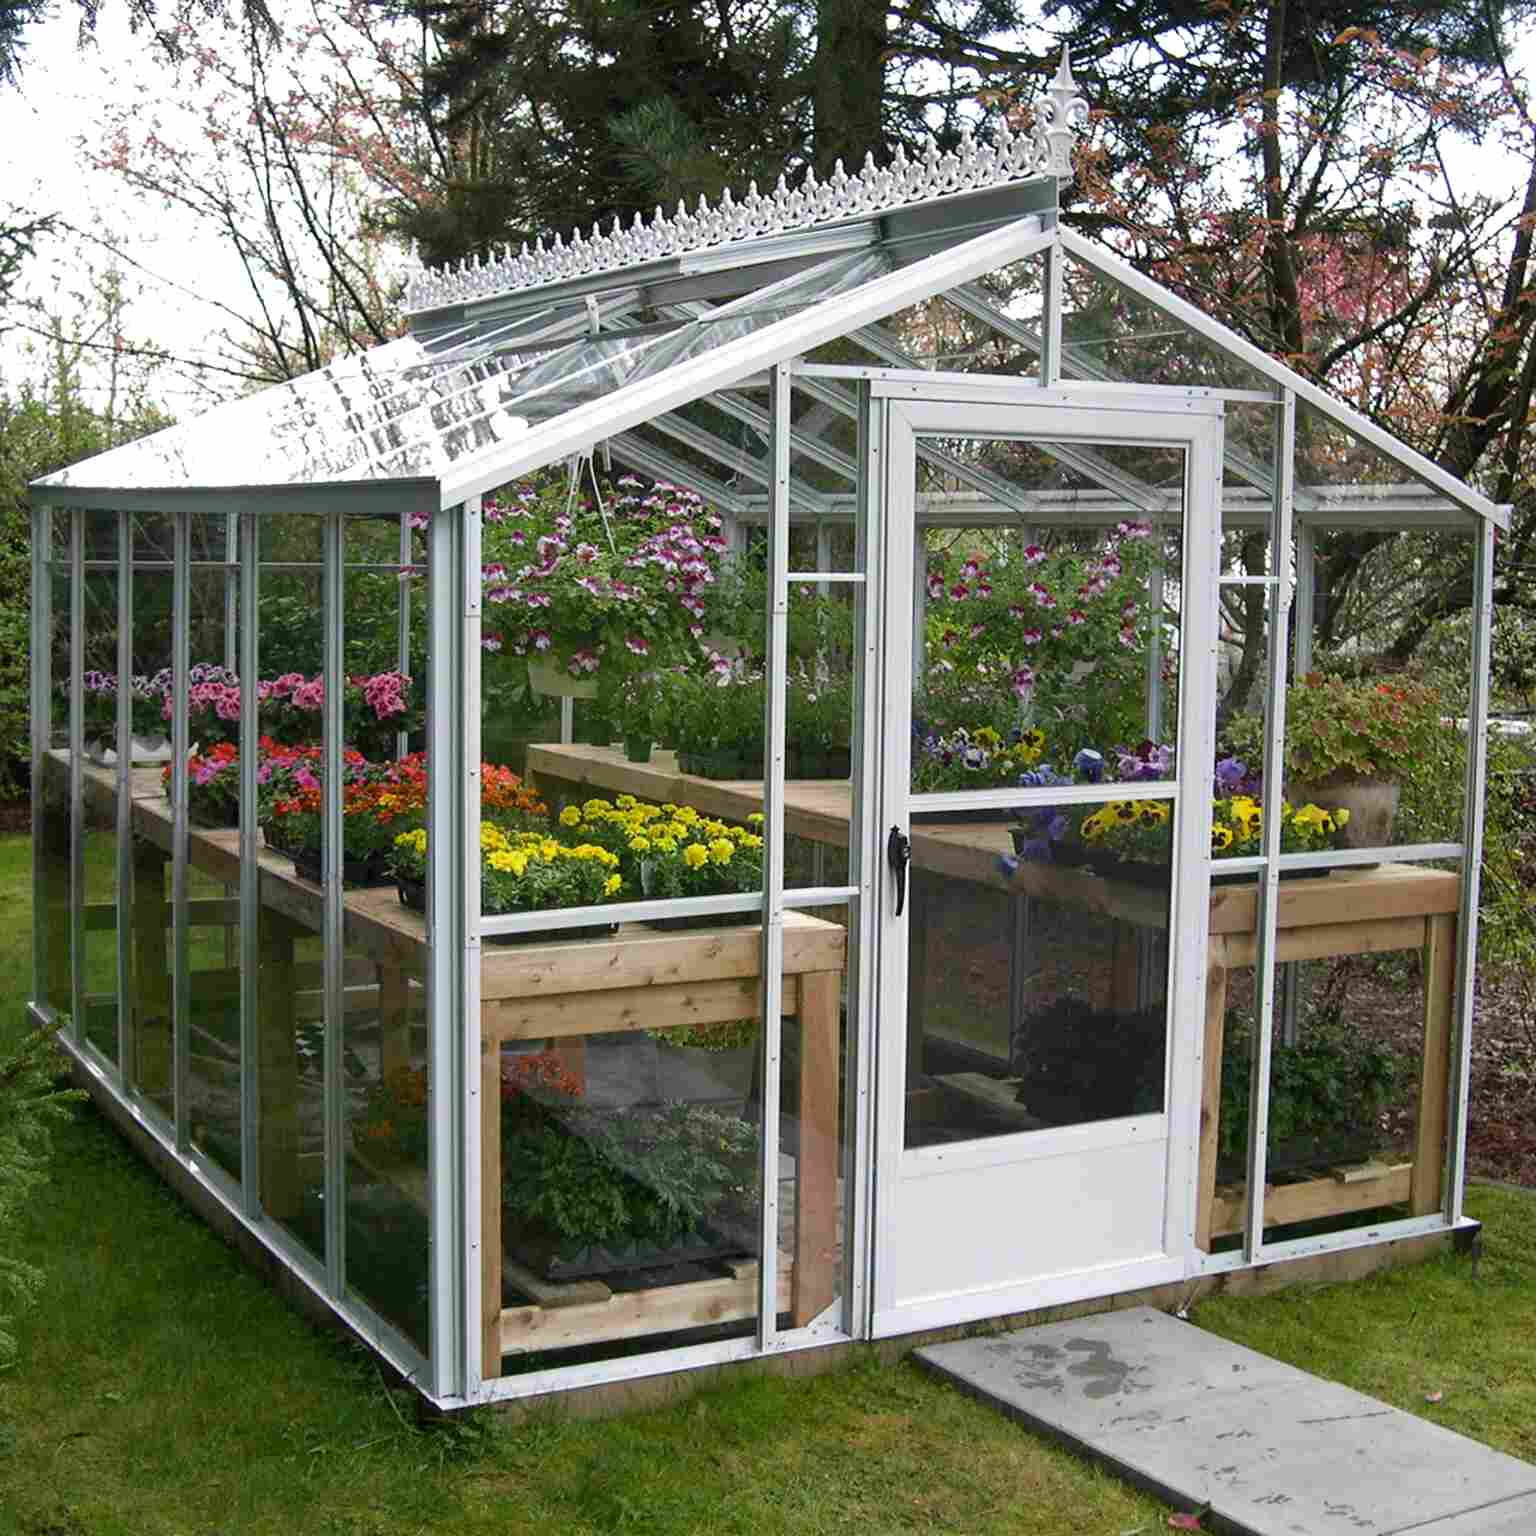 Glass Greenhouses for sale  in UK View 67 bargains